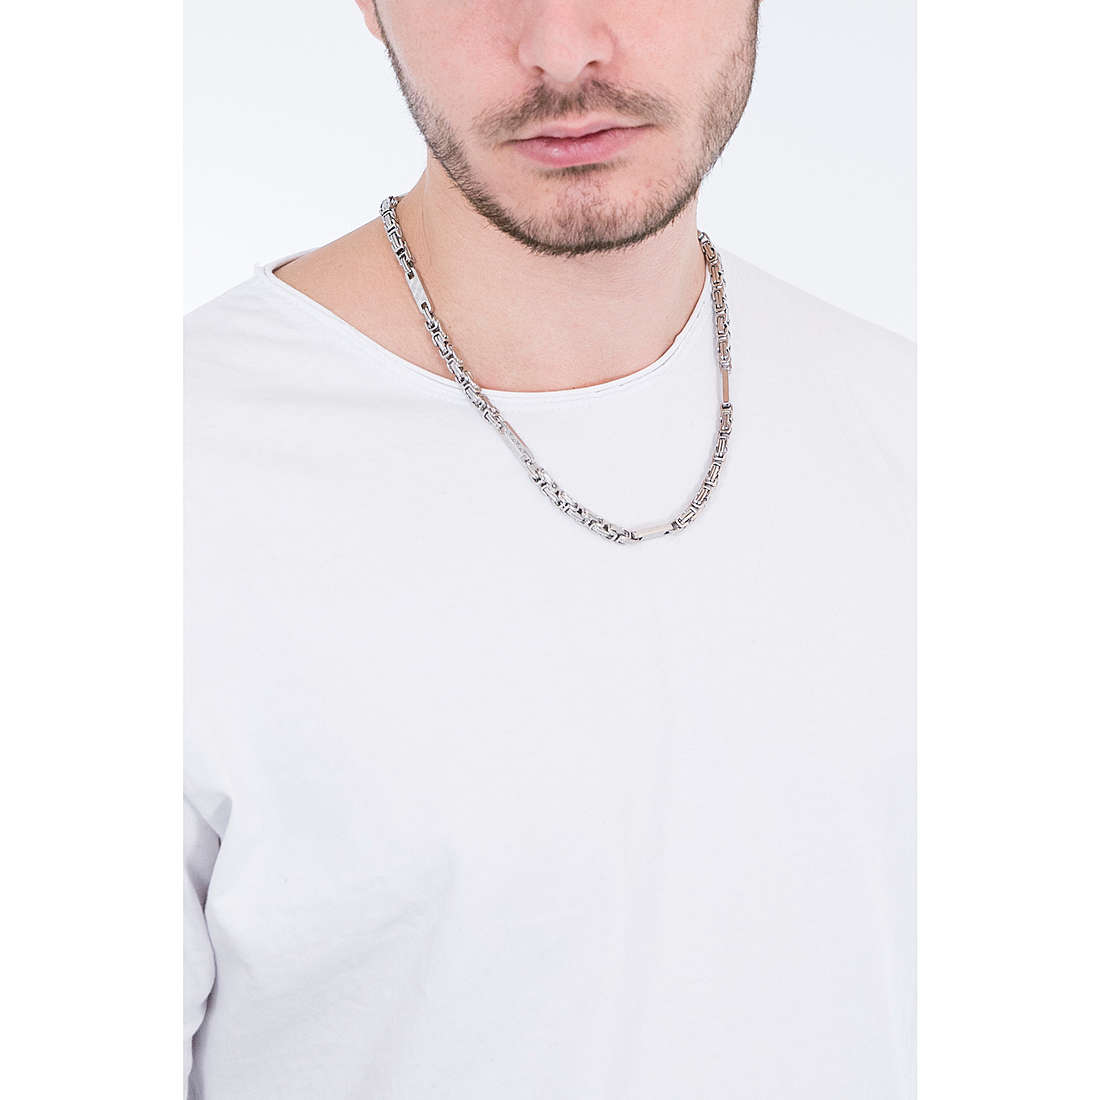 Sector necklaces Rude man SALV15 wearing